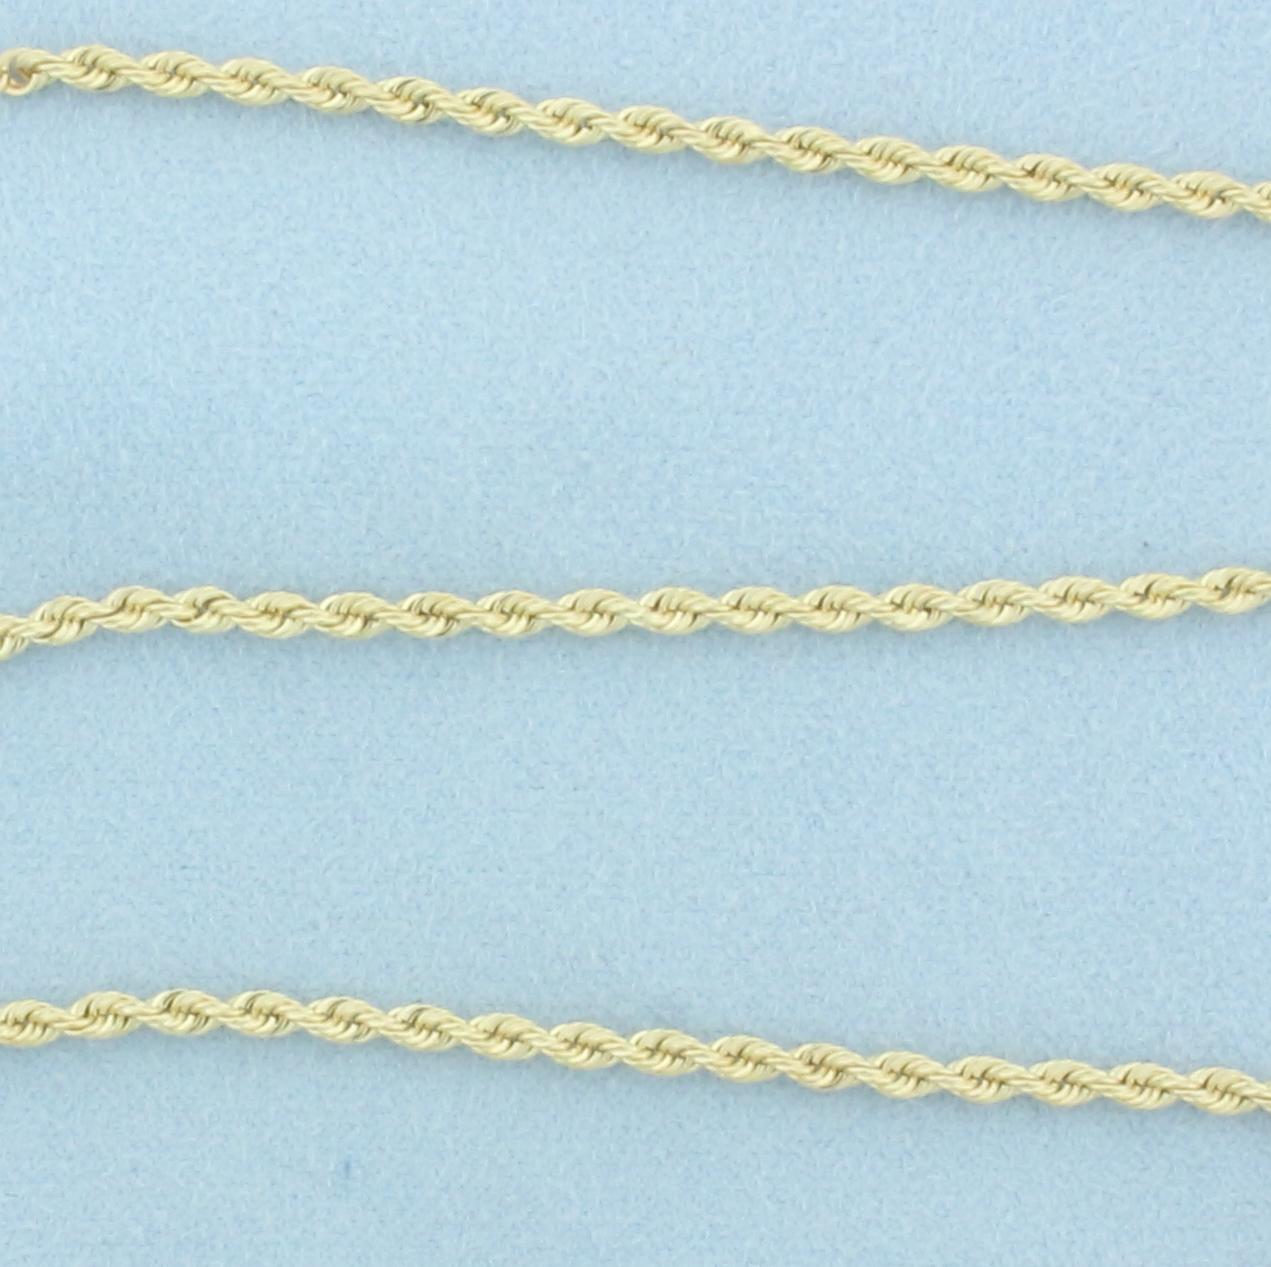 24 Inch Diamond Cut Rope Link Chain Necklace In 14k Yellow Gold